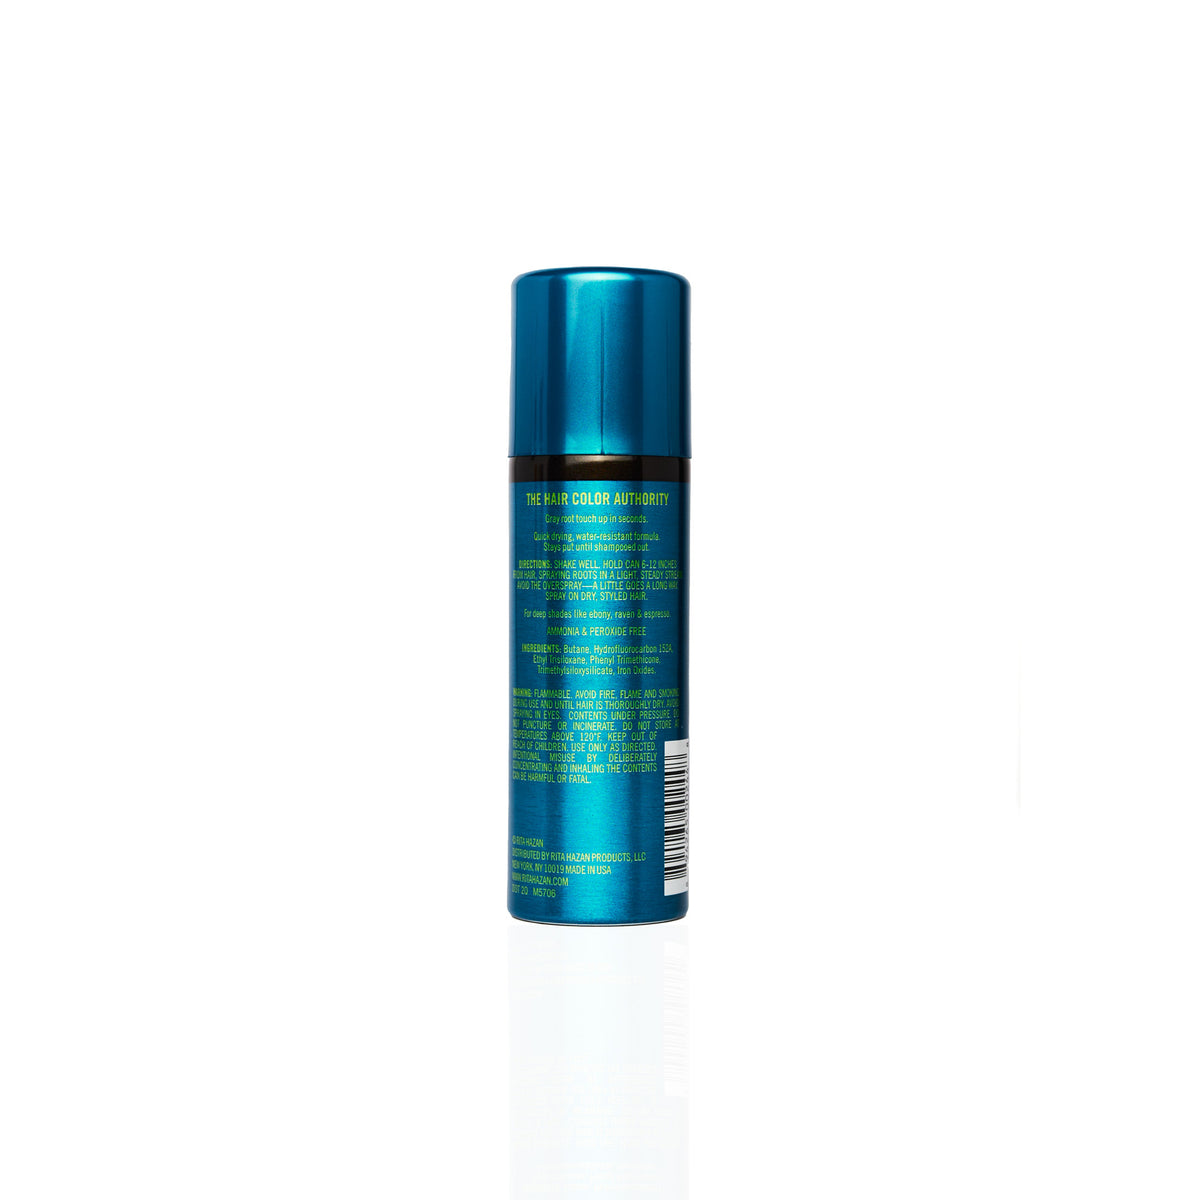 Root Concealer Touch Up Spray